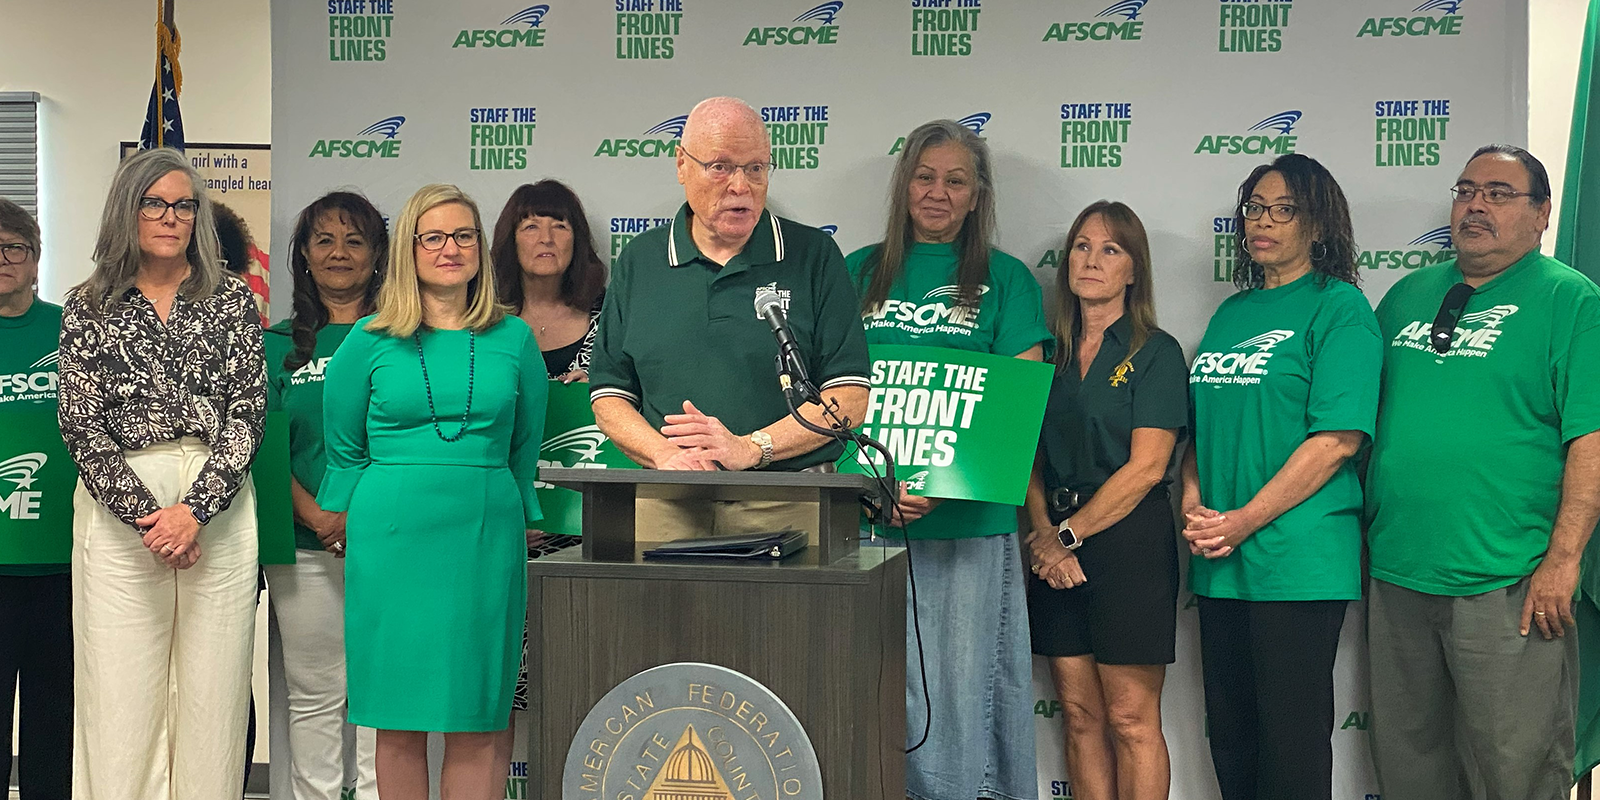 At Phoenix ‘Staff the Front Lines’ stop, governor, mayor join AFSCME president, workers 